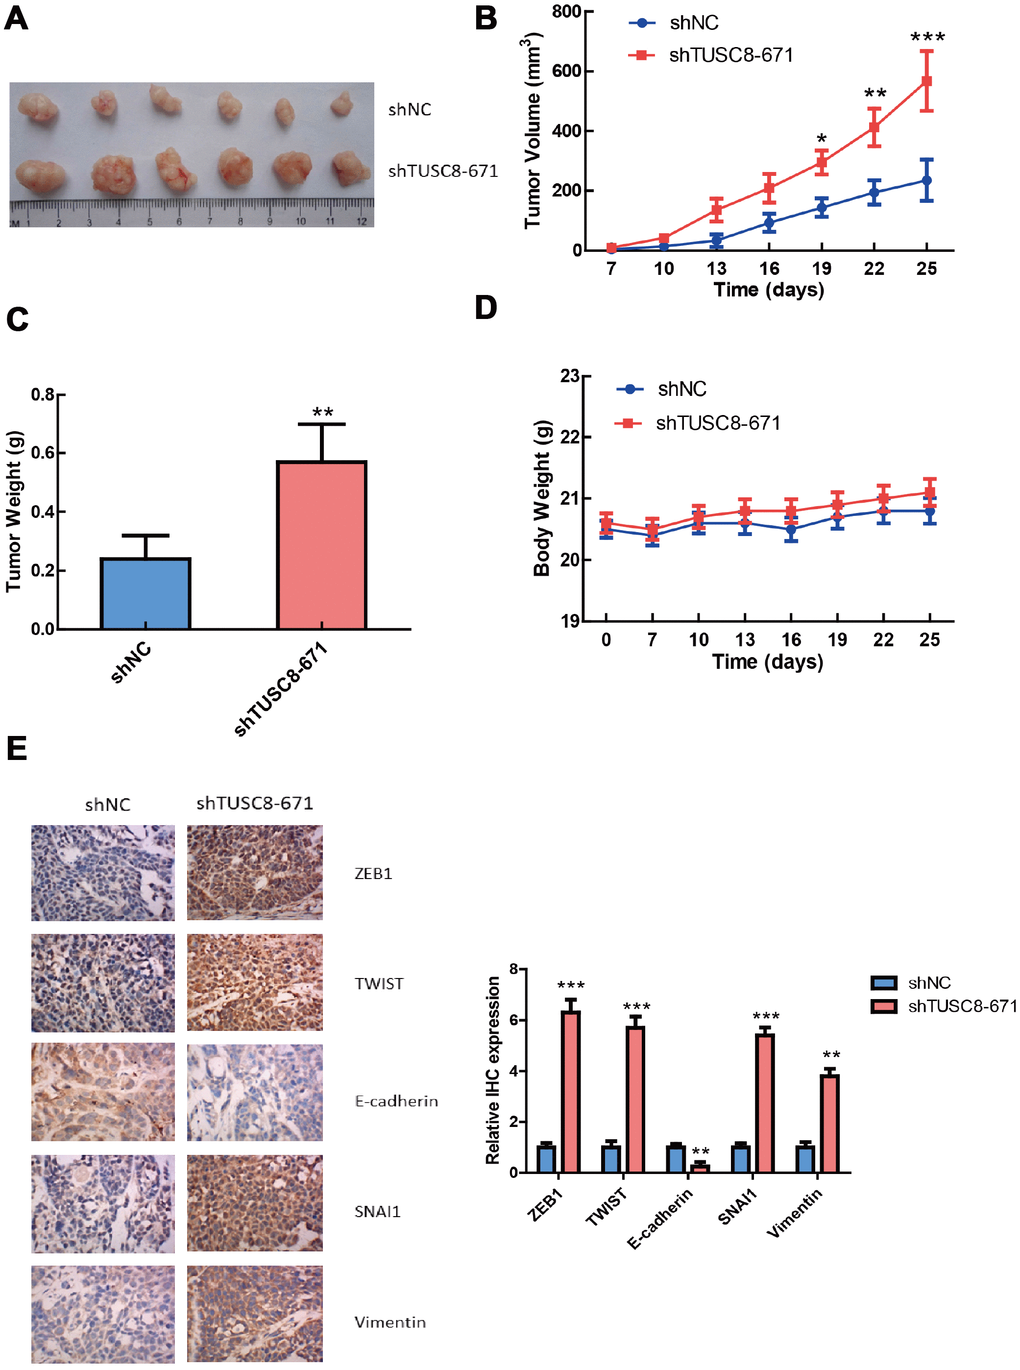 TUSC8 knock-down promotes tumorigenicity and tumor growth of breast cancer cells in vivo. (A, B) Stably knock-down of TUSC8 promoted breast cancer cell growth and increased tumor volume in MCF-7 cell line when subcutaneously injection into nude mice. (C) Knock-down of TUSC8 significantly increased the average tumor weight of breast tumors formed in the nude mice. (D) The body weight of nude mice exhibited no significant difference between TUSC8 knock-down group and negative control group. (E) The IHC staining of EMT related markers in nude mice breast tumors of TUSC8 knock-down group and negative control group. The asterisks (*, **, ***) indicate a significant difference (p p p 